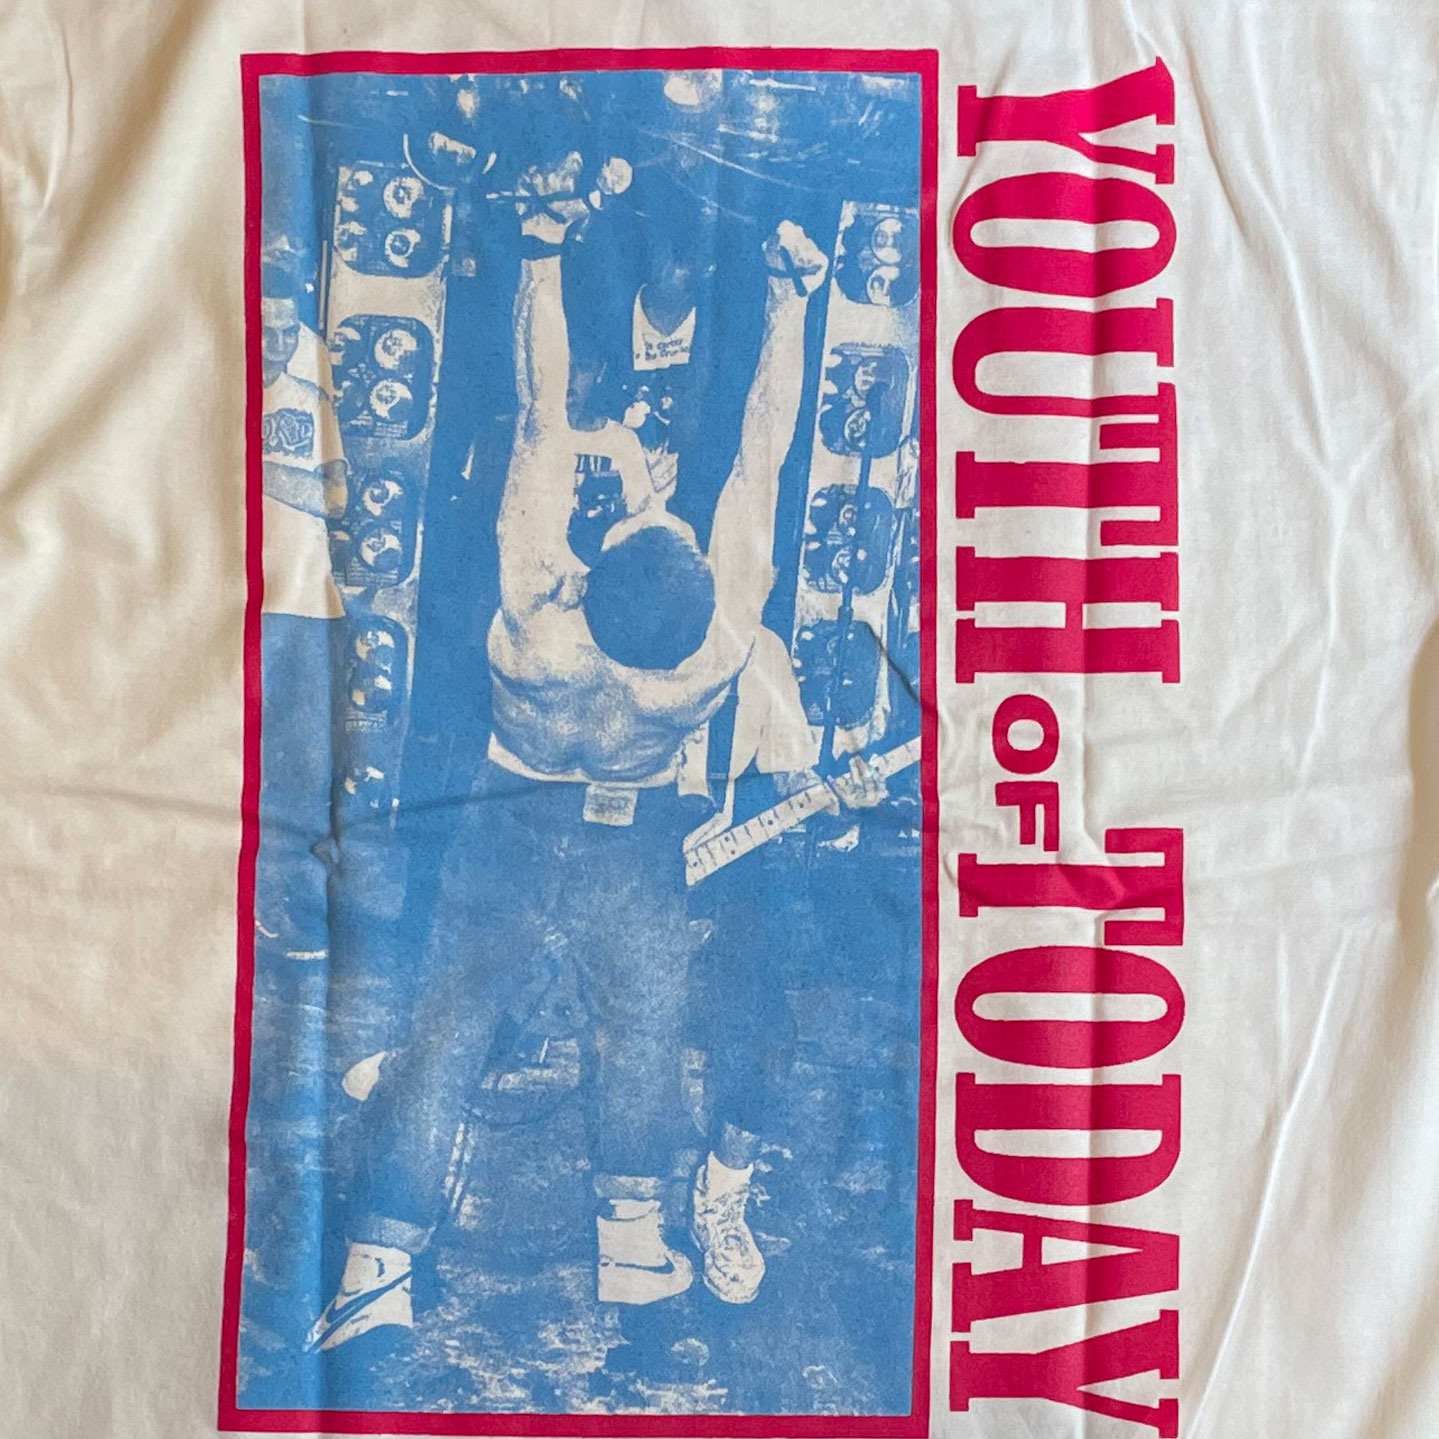 YOUTH OF TODAY Tシャツ PHOTO